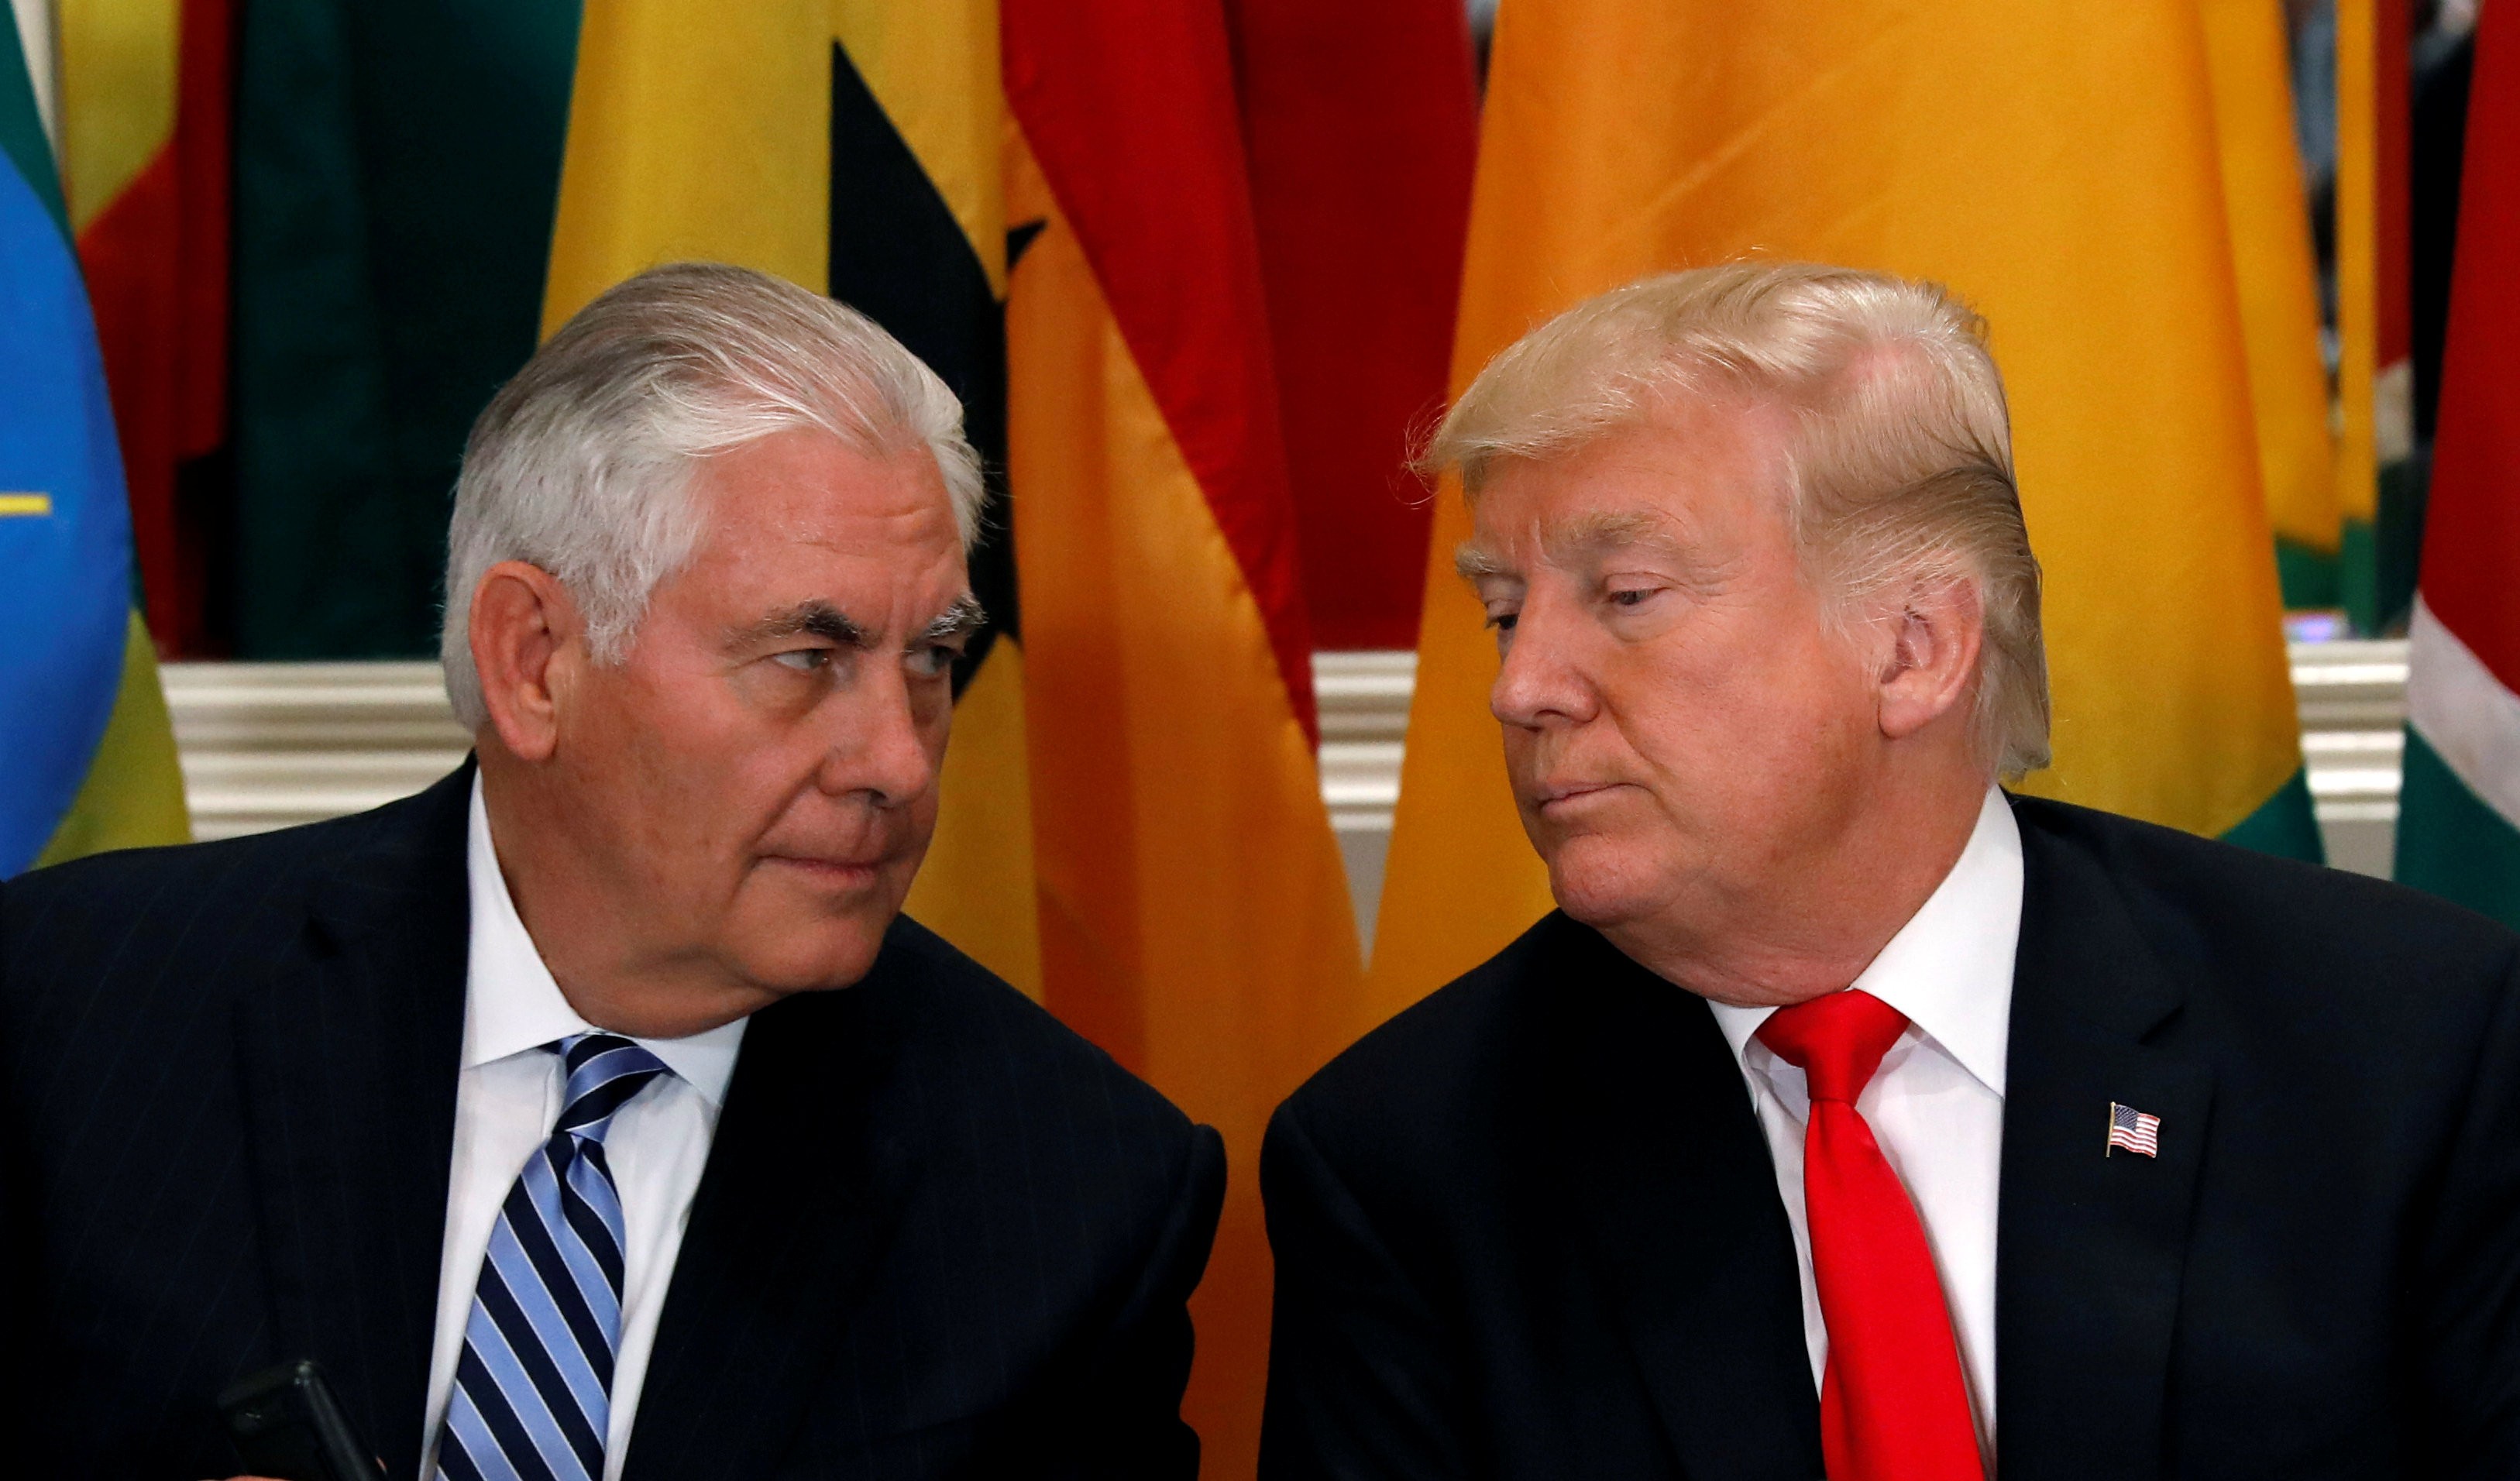 US Secretary of State Rex Tillerson confers with President Donald Trump at the UN General Assembly in New York, in September. Photo: Reuters